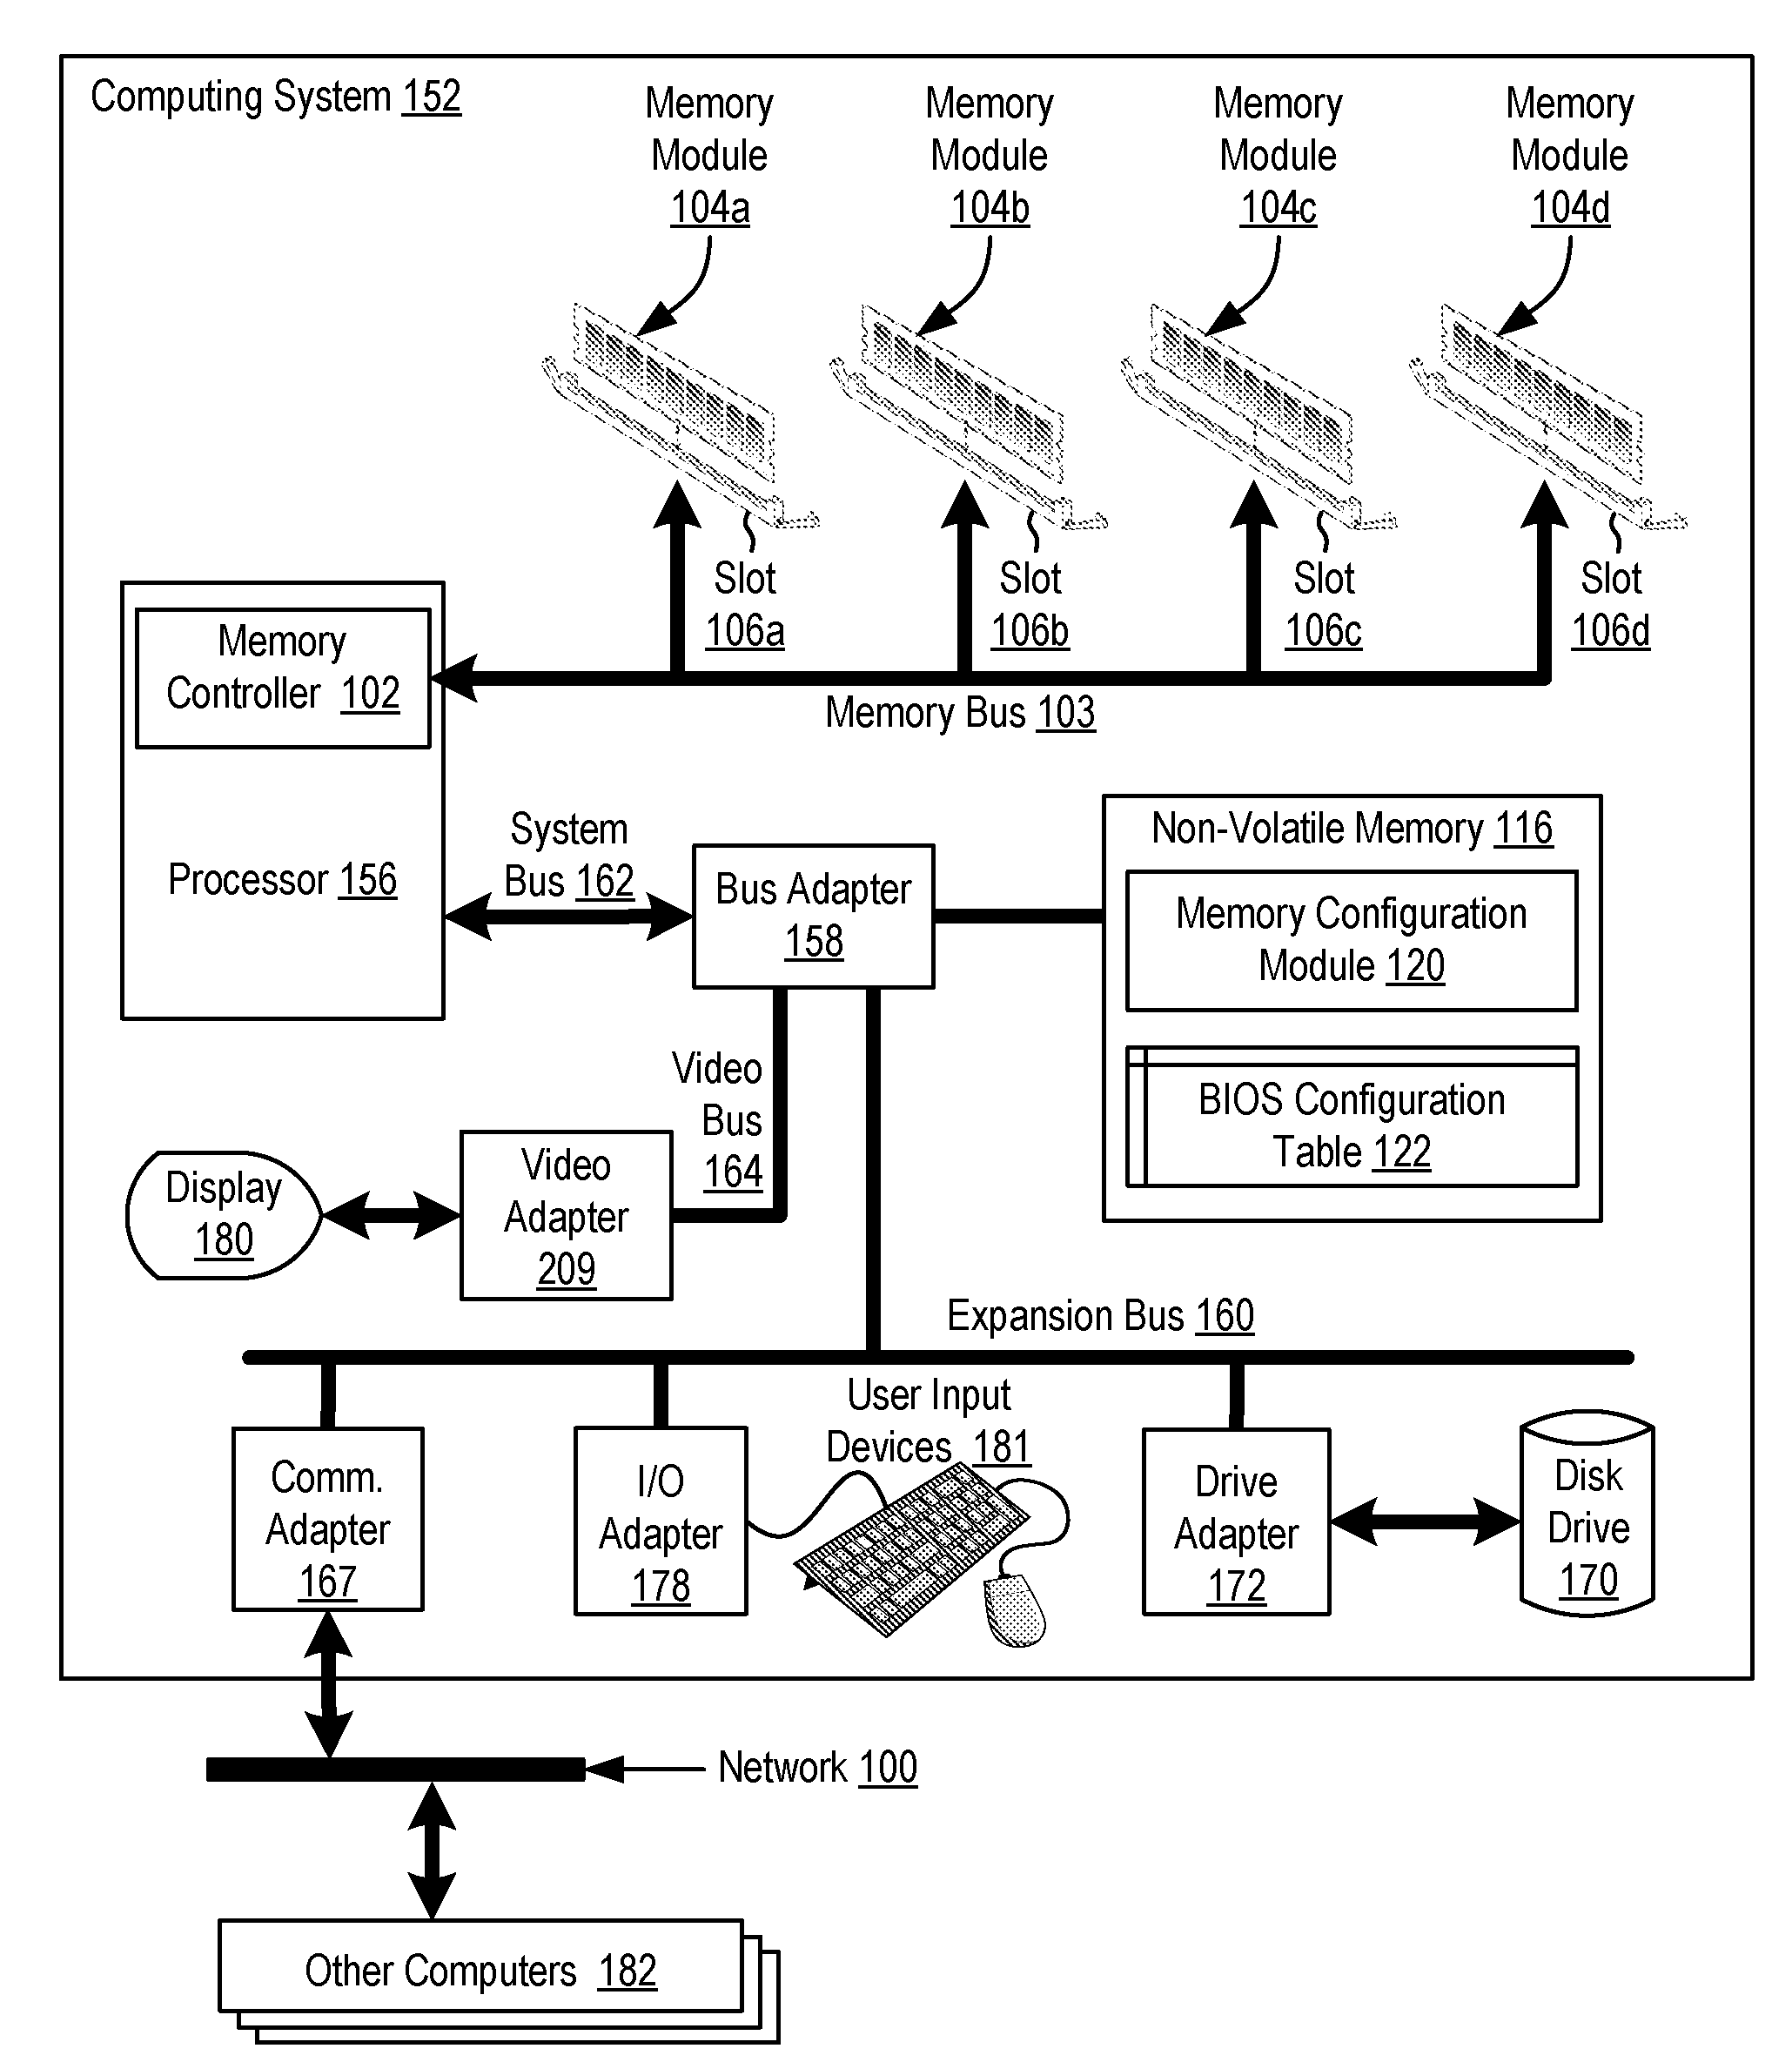 Enabling Memory Module Slots In A Computing System After A Repair Action